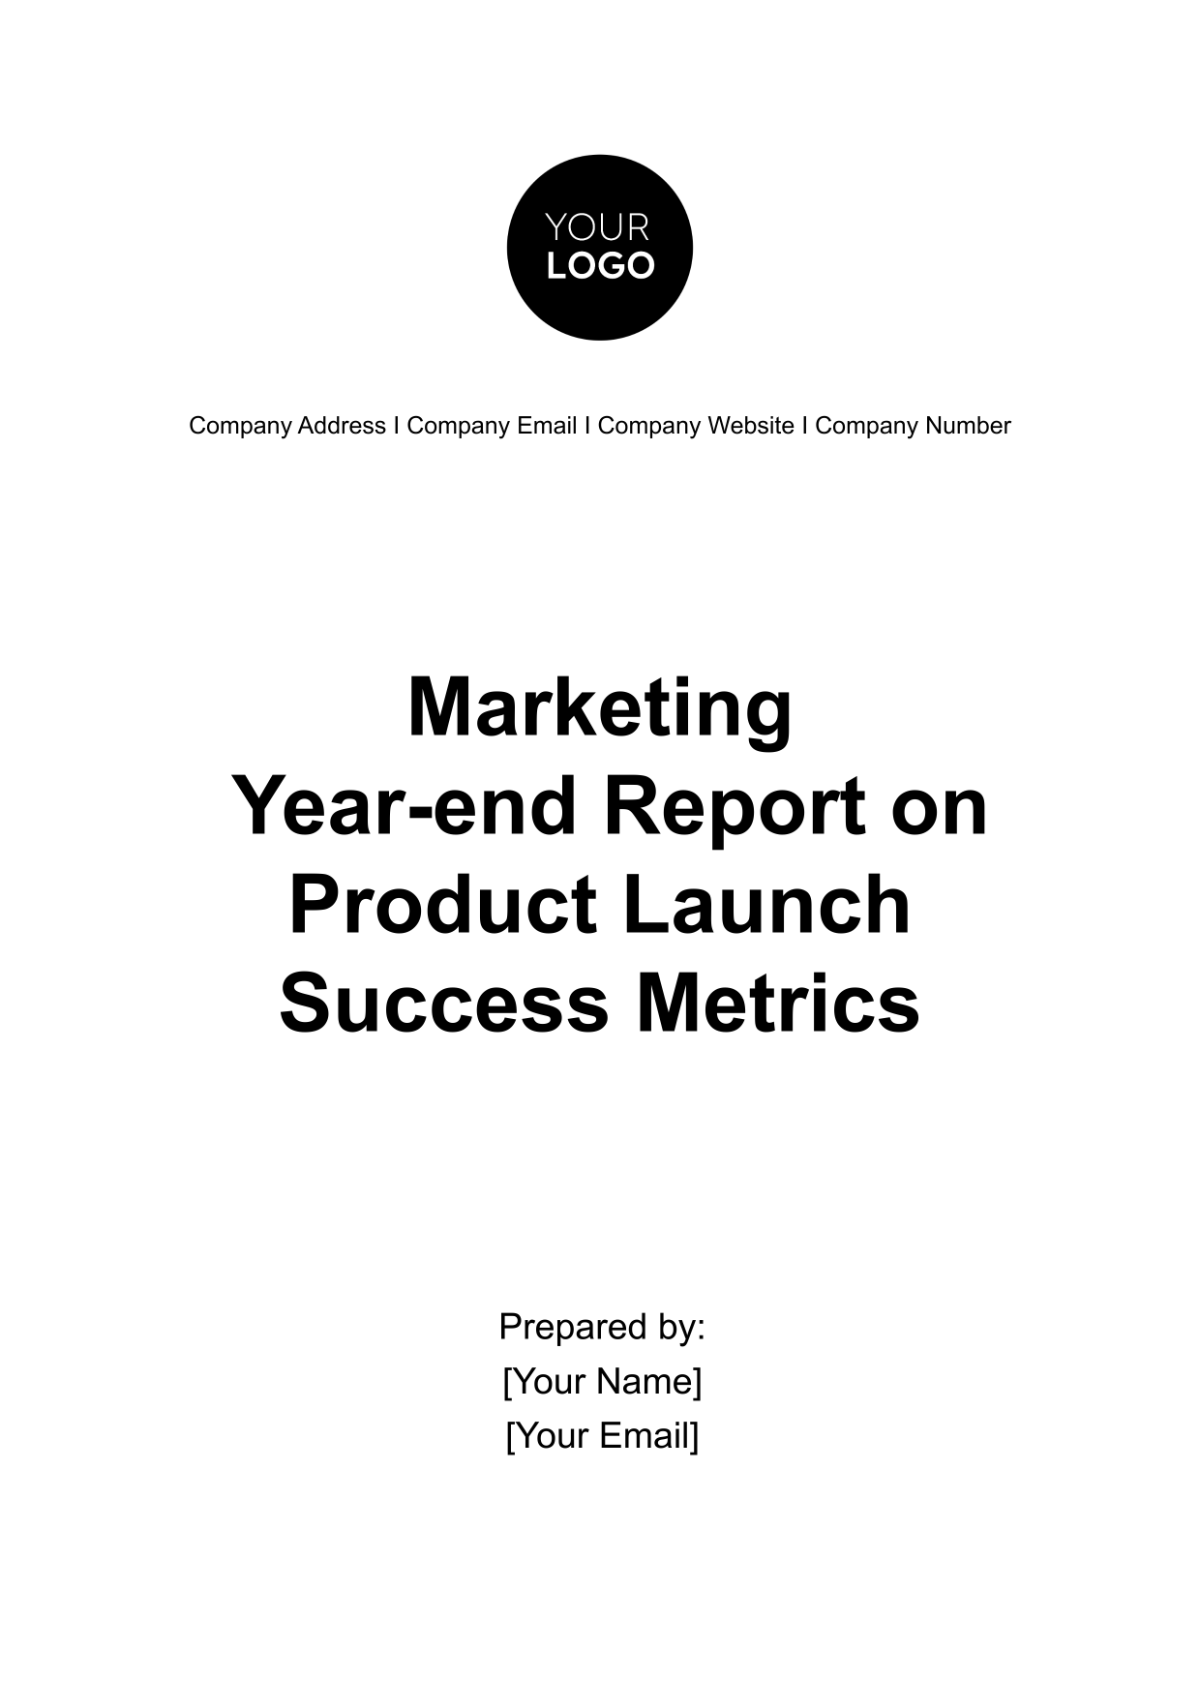 Marketing Year-end Report on Product Launch Success Metrics Template